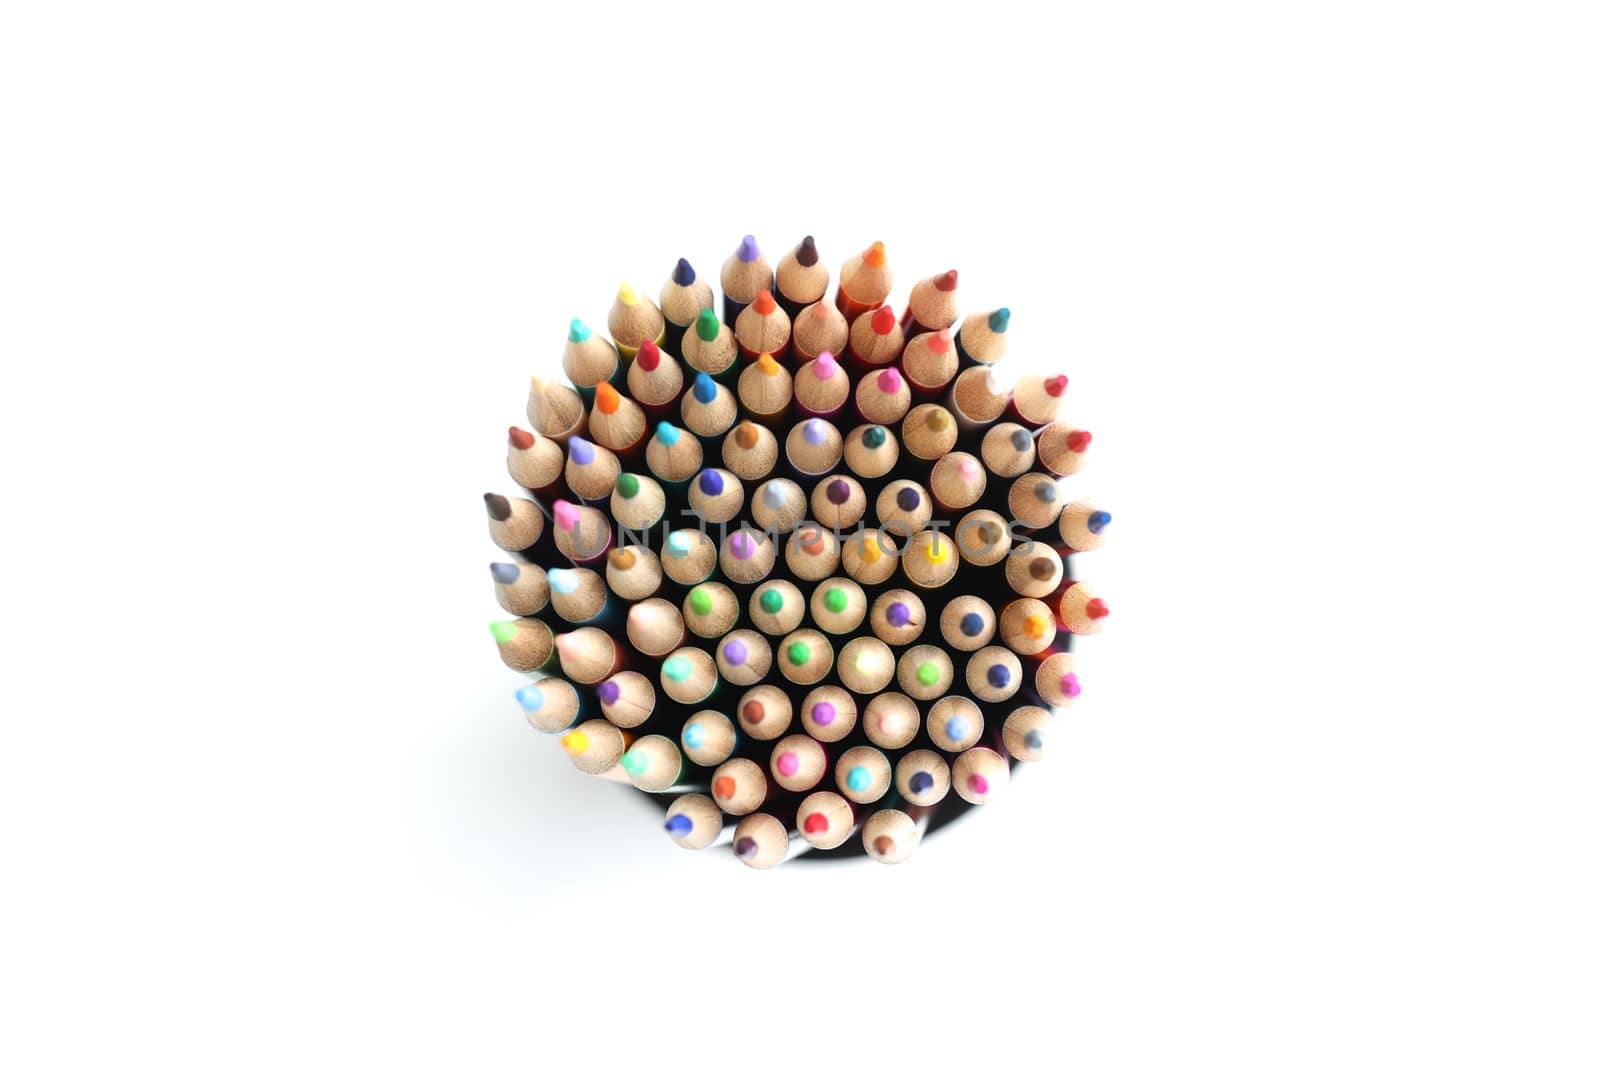 Colored pencils circle on white background from above. Colored pencils for drawing concept